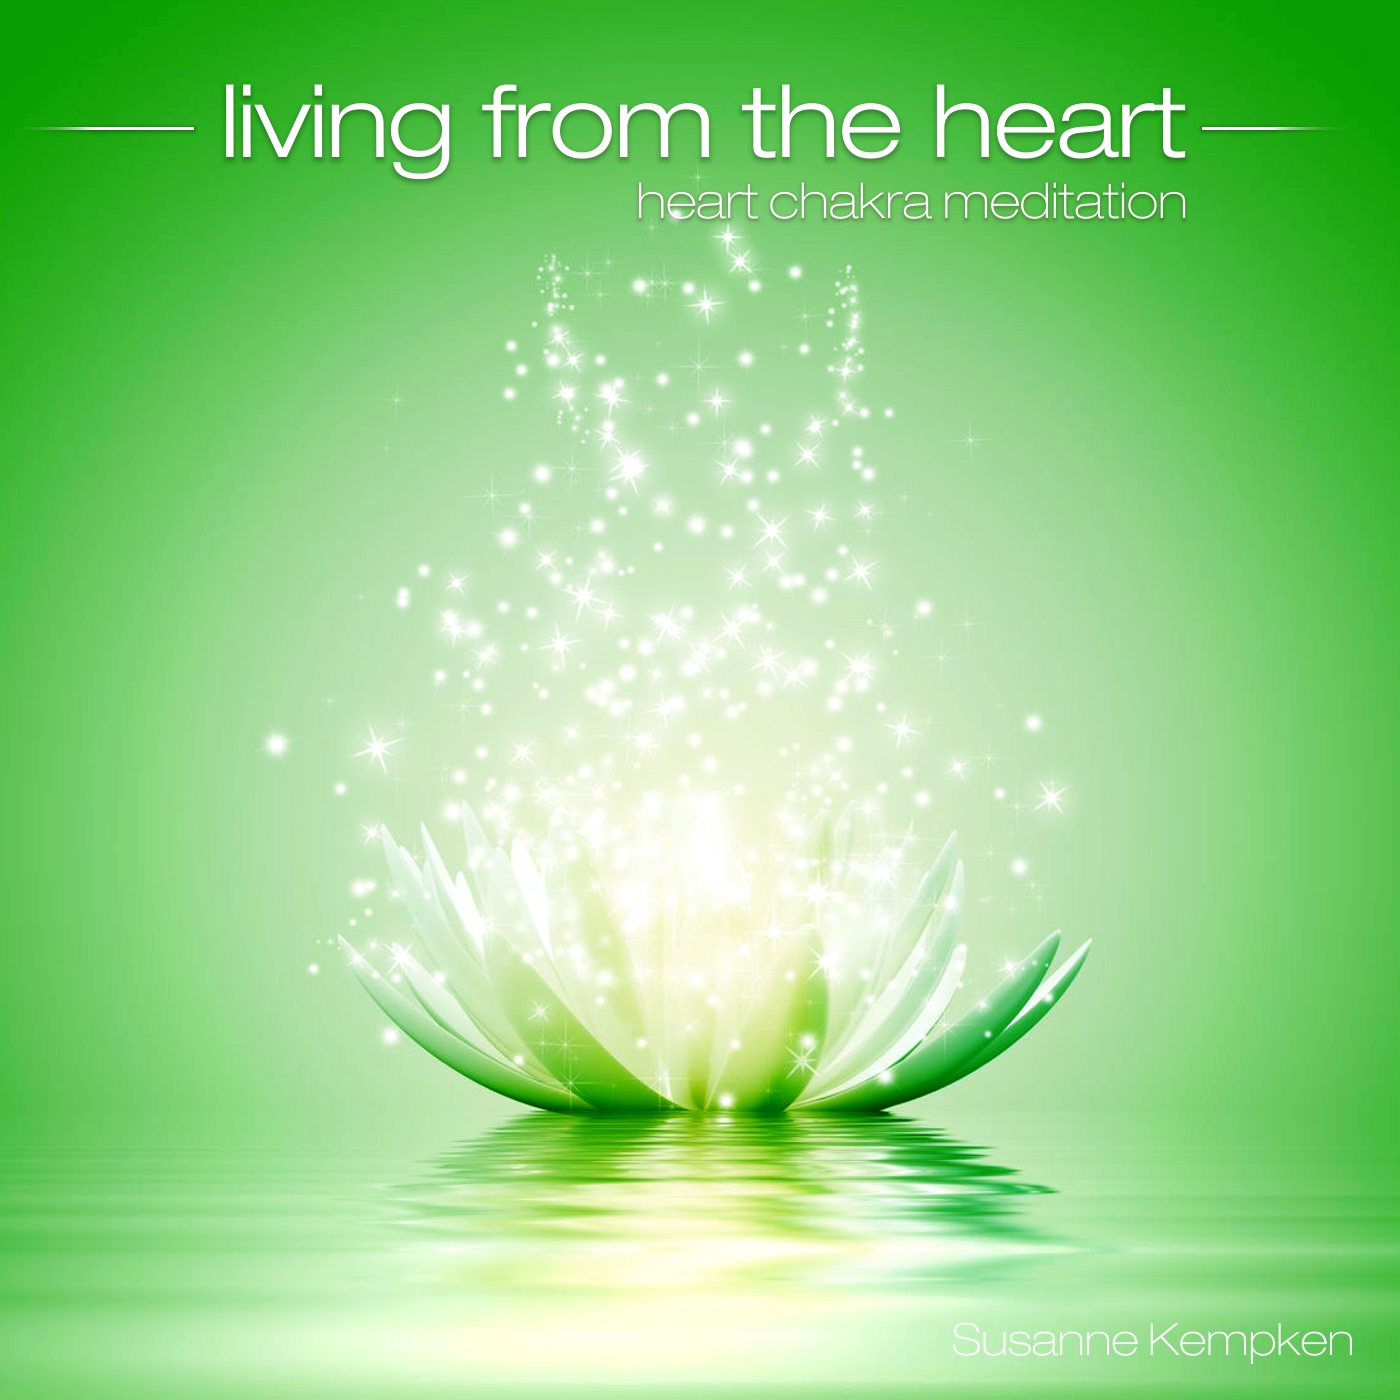 Living from the Heart - Guided Meditation by Susanne Kempken